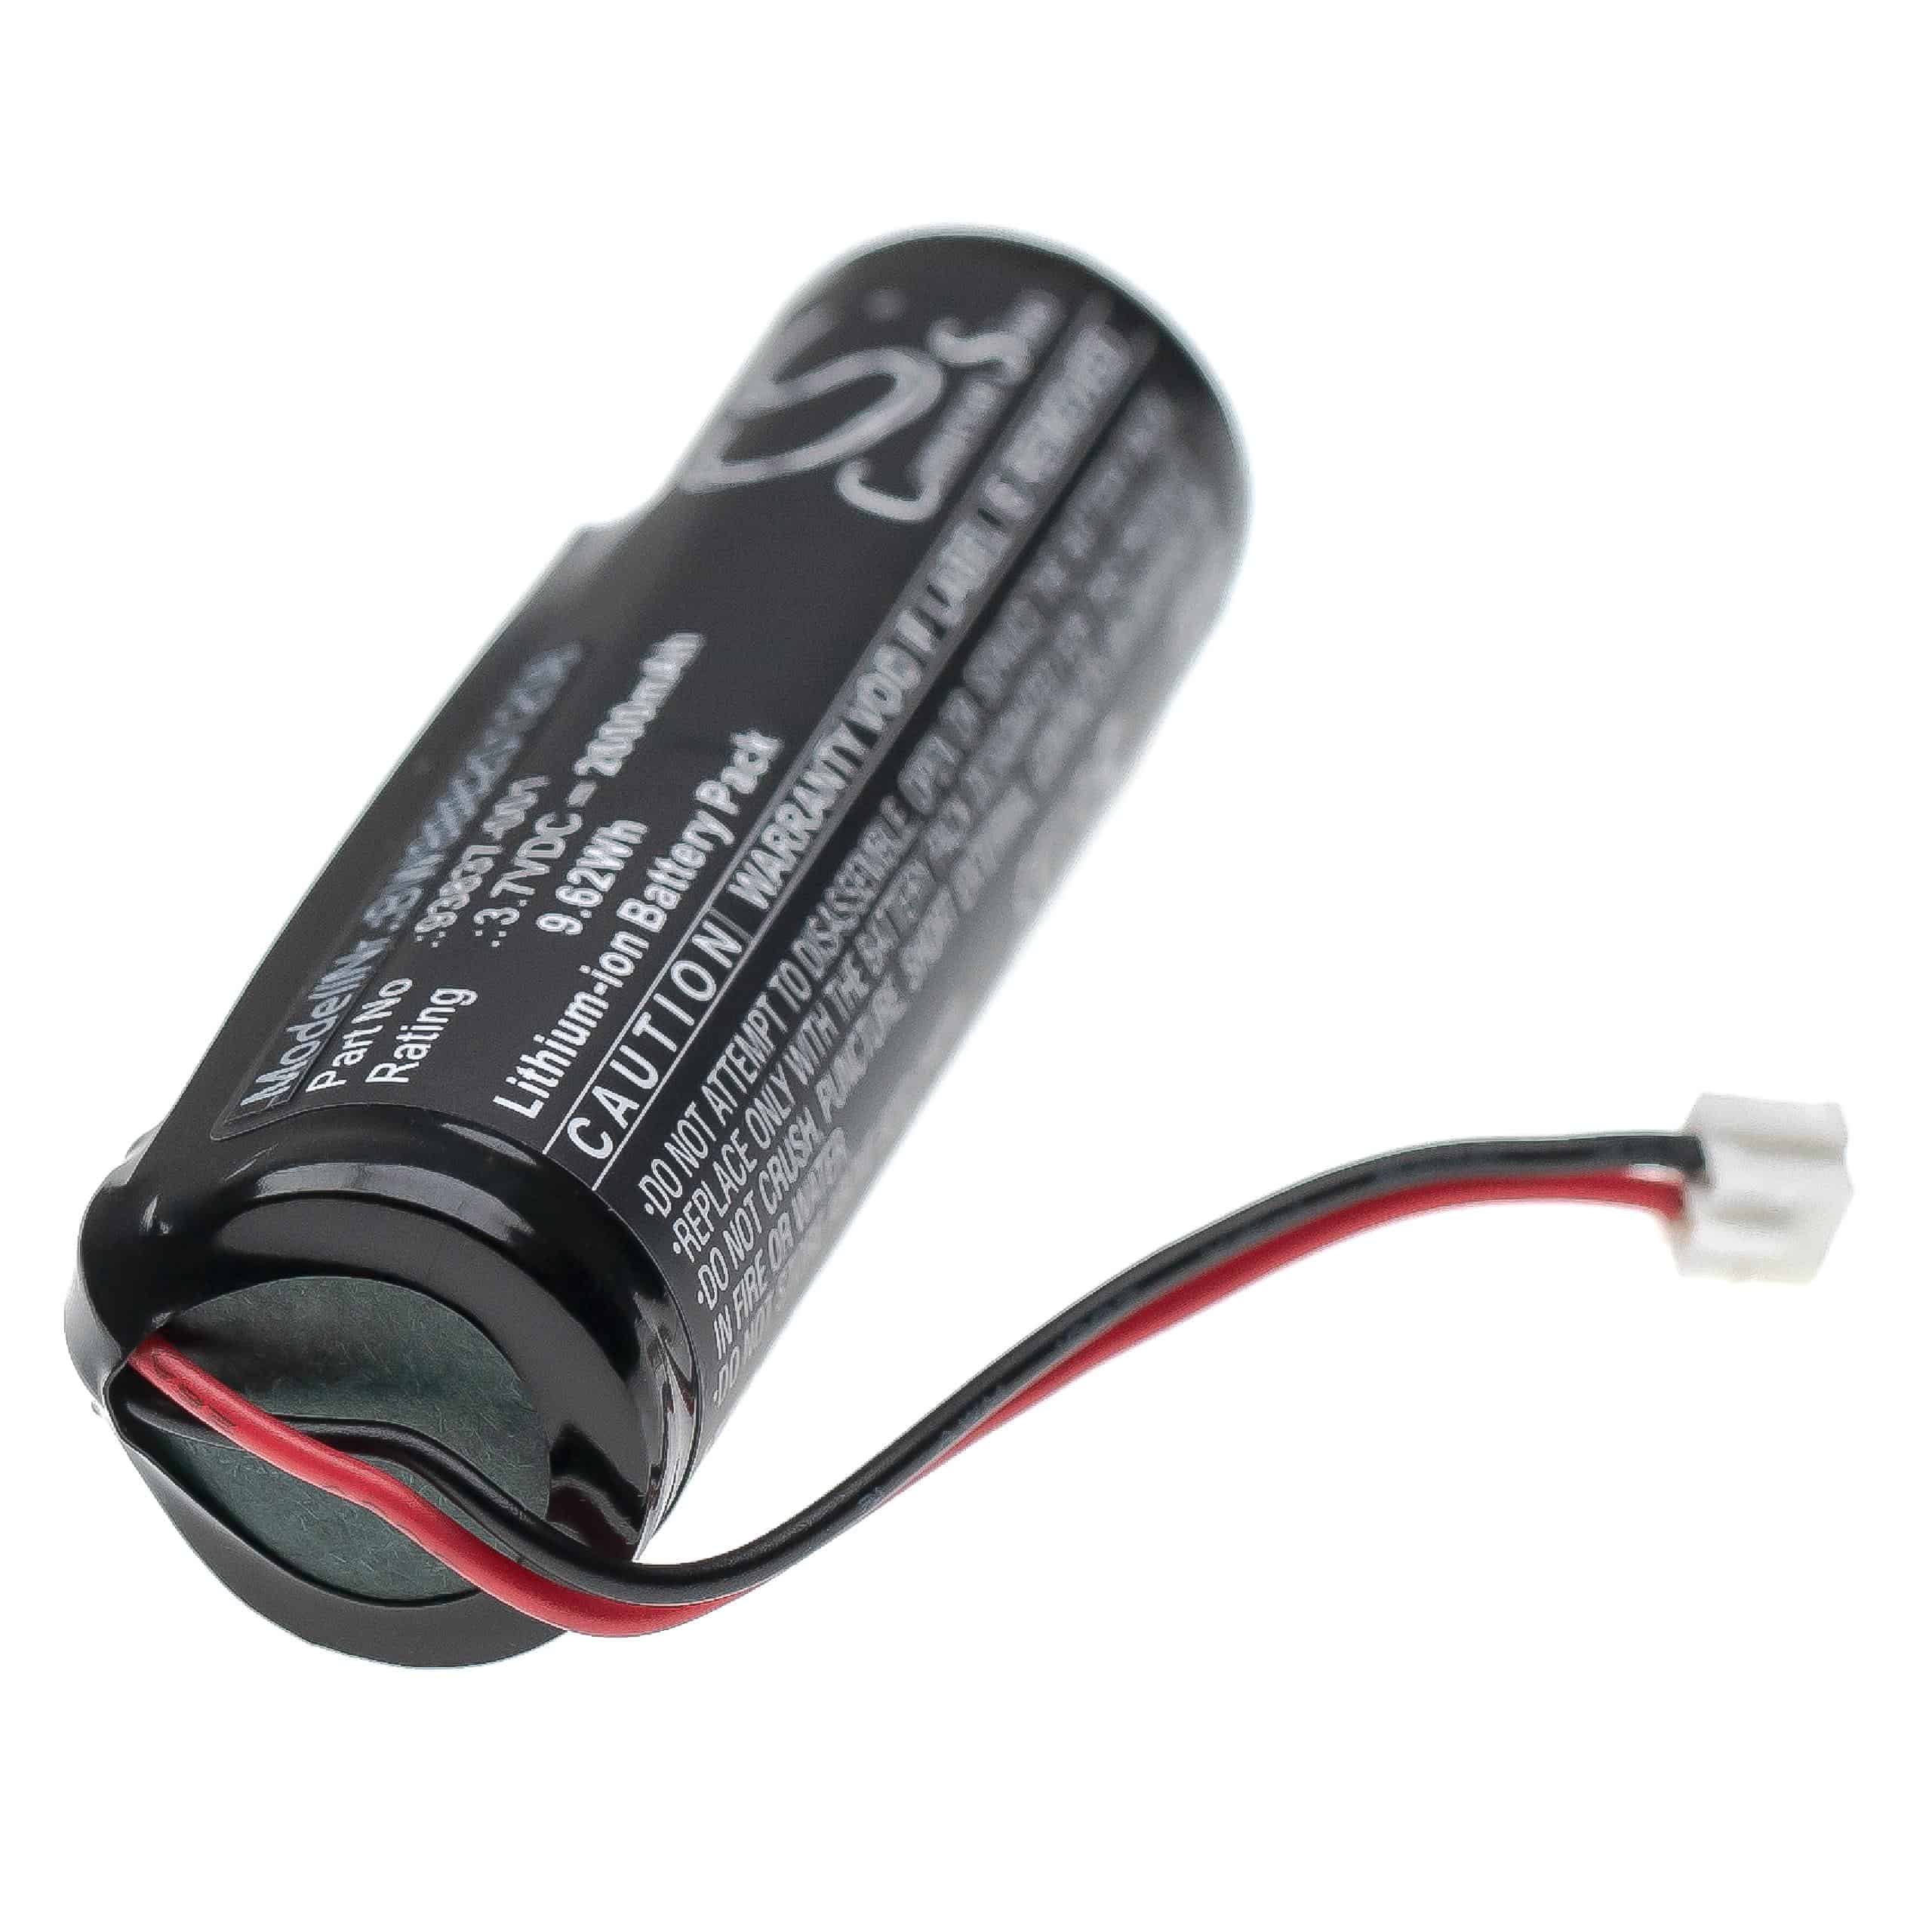 Electric Razor Battery Replacement for Wahl 93837-001, 93837-200 - 2600mAh 3.7V Li-Ion